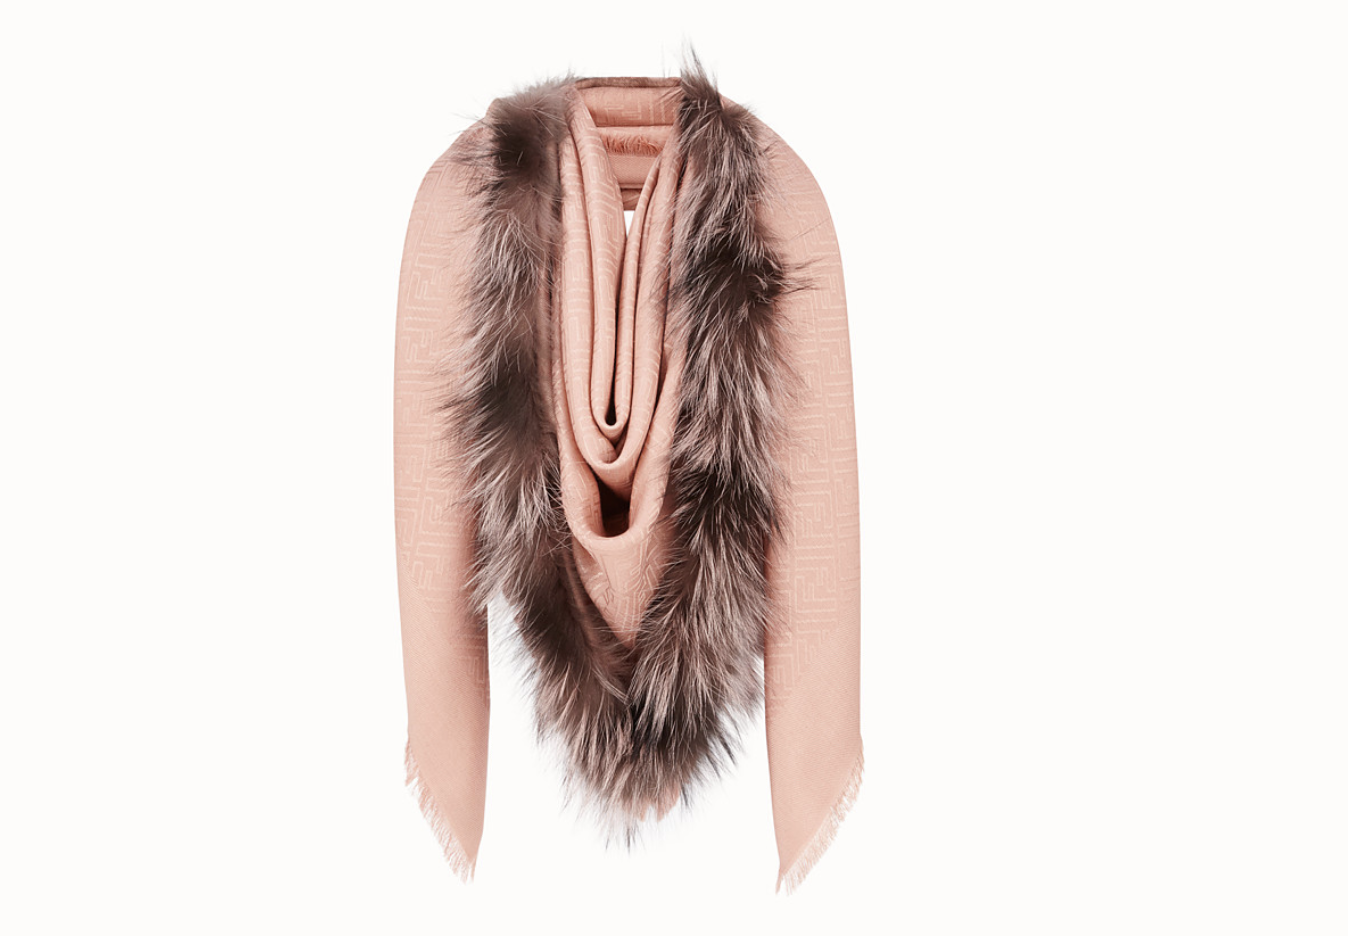 scarf that looks like a vag